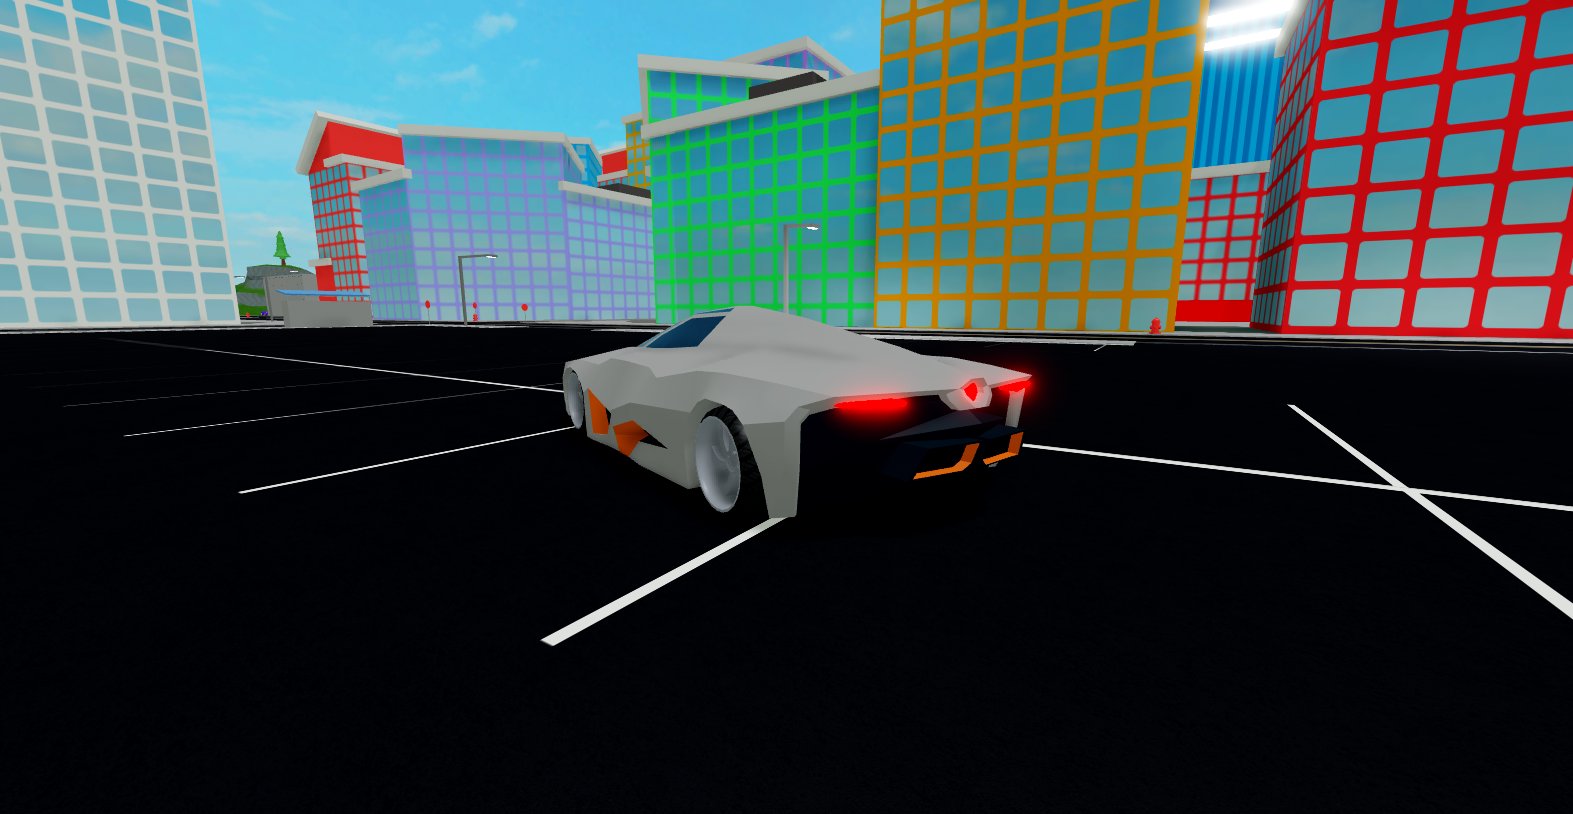 Astolfo Ar Twitter Class Car Name Thunderbolt Price 2 500 000 Top Speed Avenger Tier Acceleration Fury Tier Handling Very Good Has Primary Gray And Secondary Orange Color Both Change Able In Garage Seats One Driver Robloxmadcity Madcity - roblox mad city lamborghini myusernamesthis